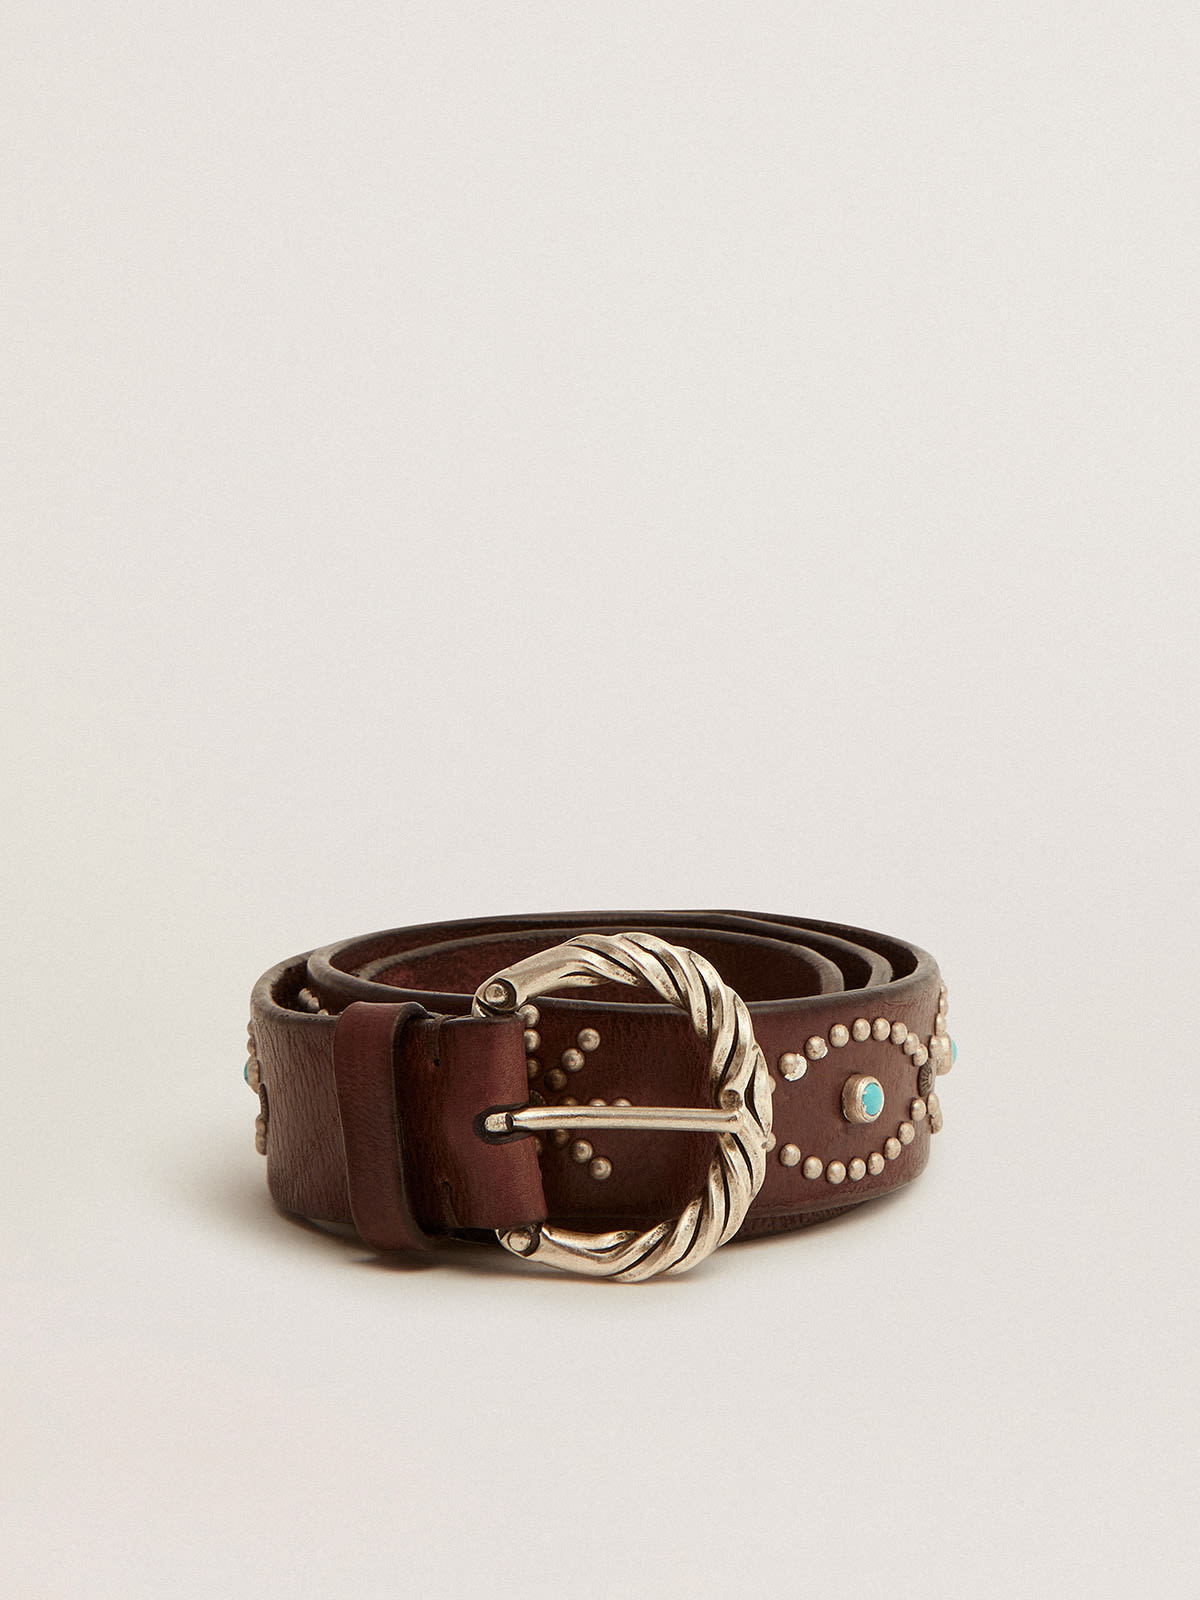 Golden Goose - Women's belt in dark brown leather with colored studs in 